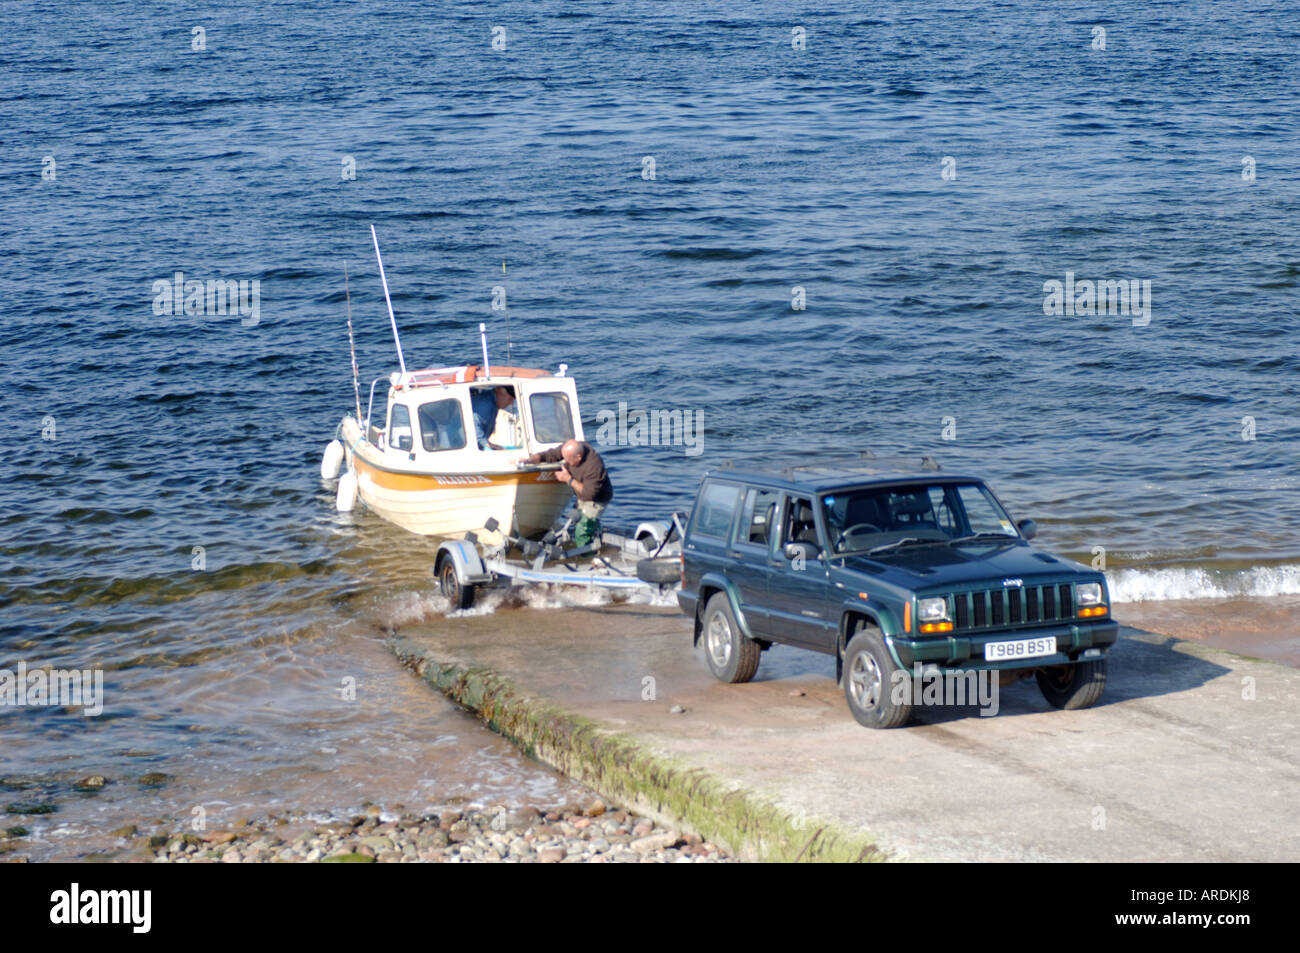 The Slipway at Cromarty on the Cromarty Firth, Easter Ross. Scotland.  XPL 3595-348 Stock Photo